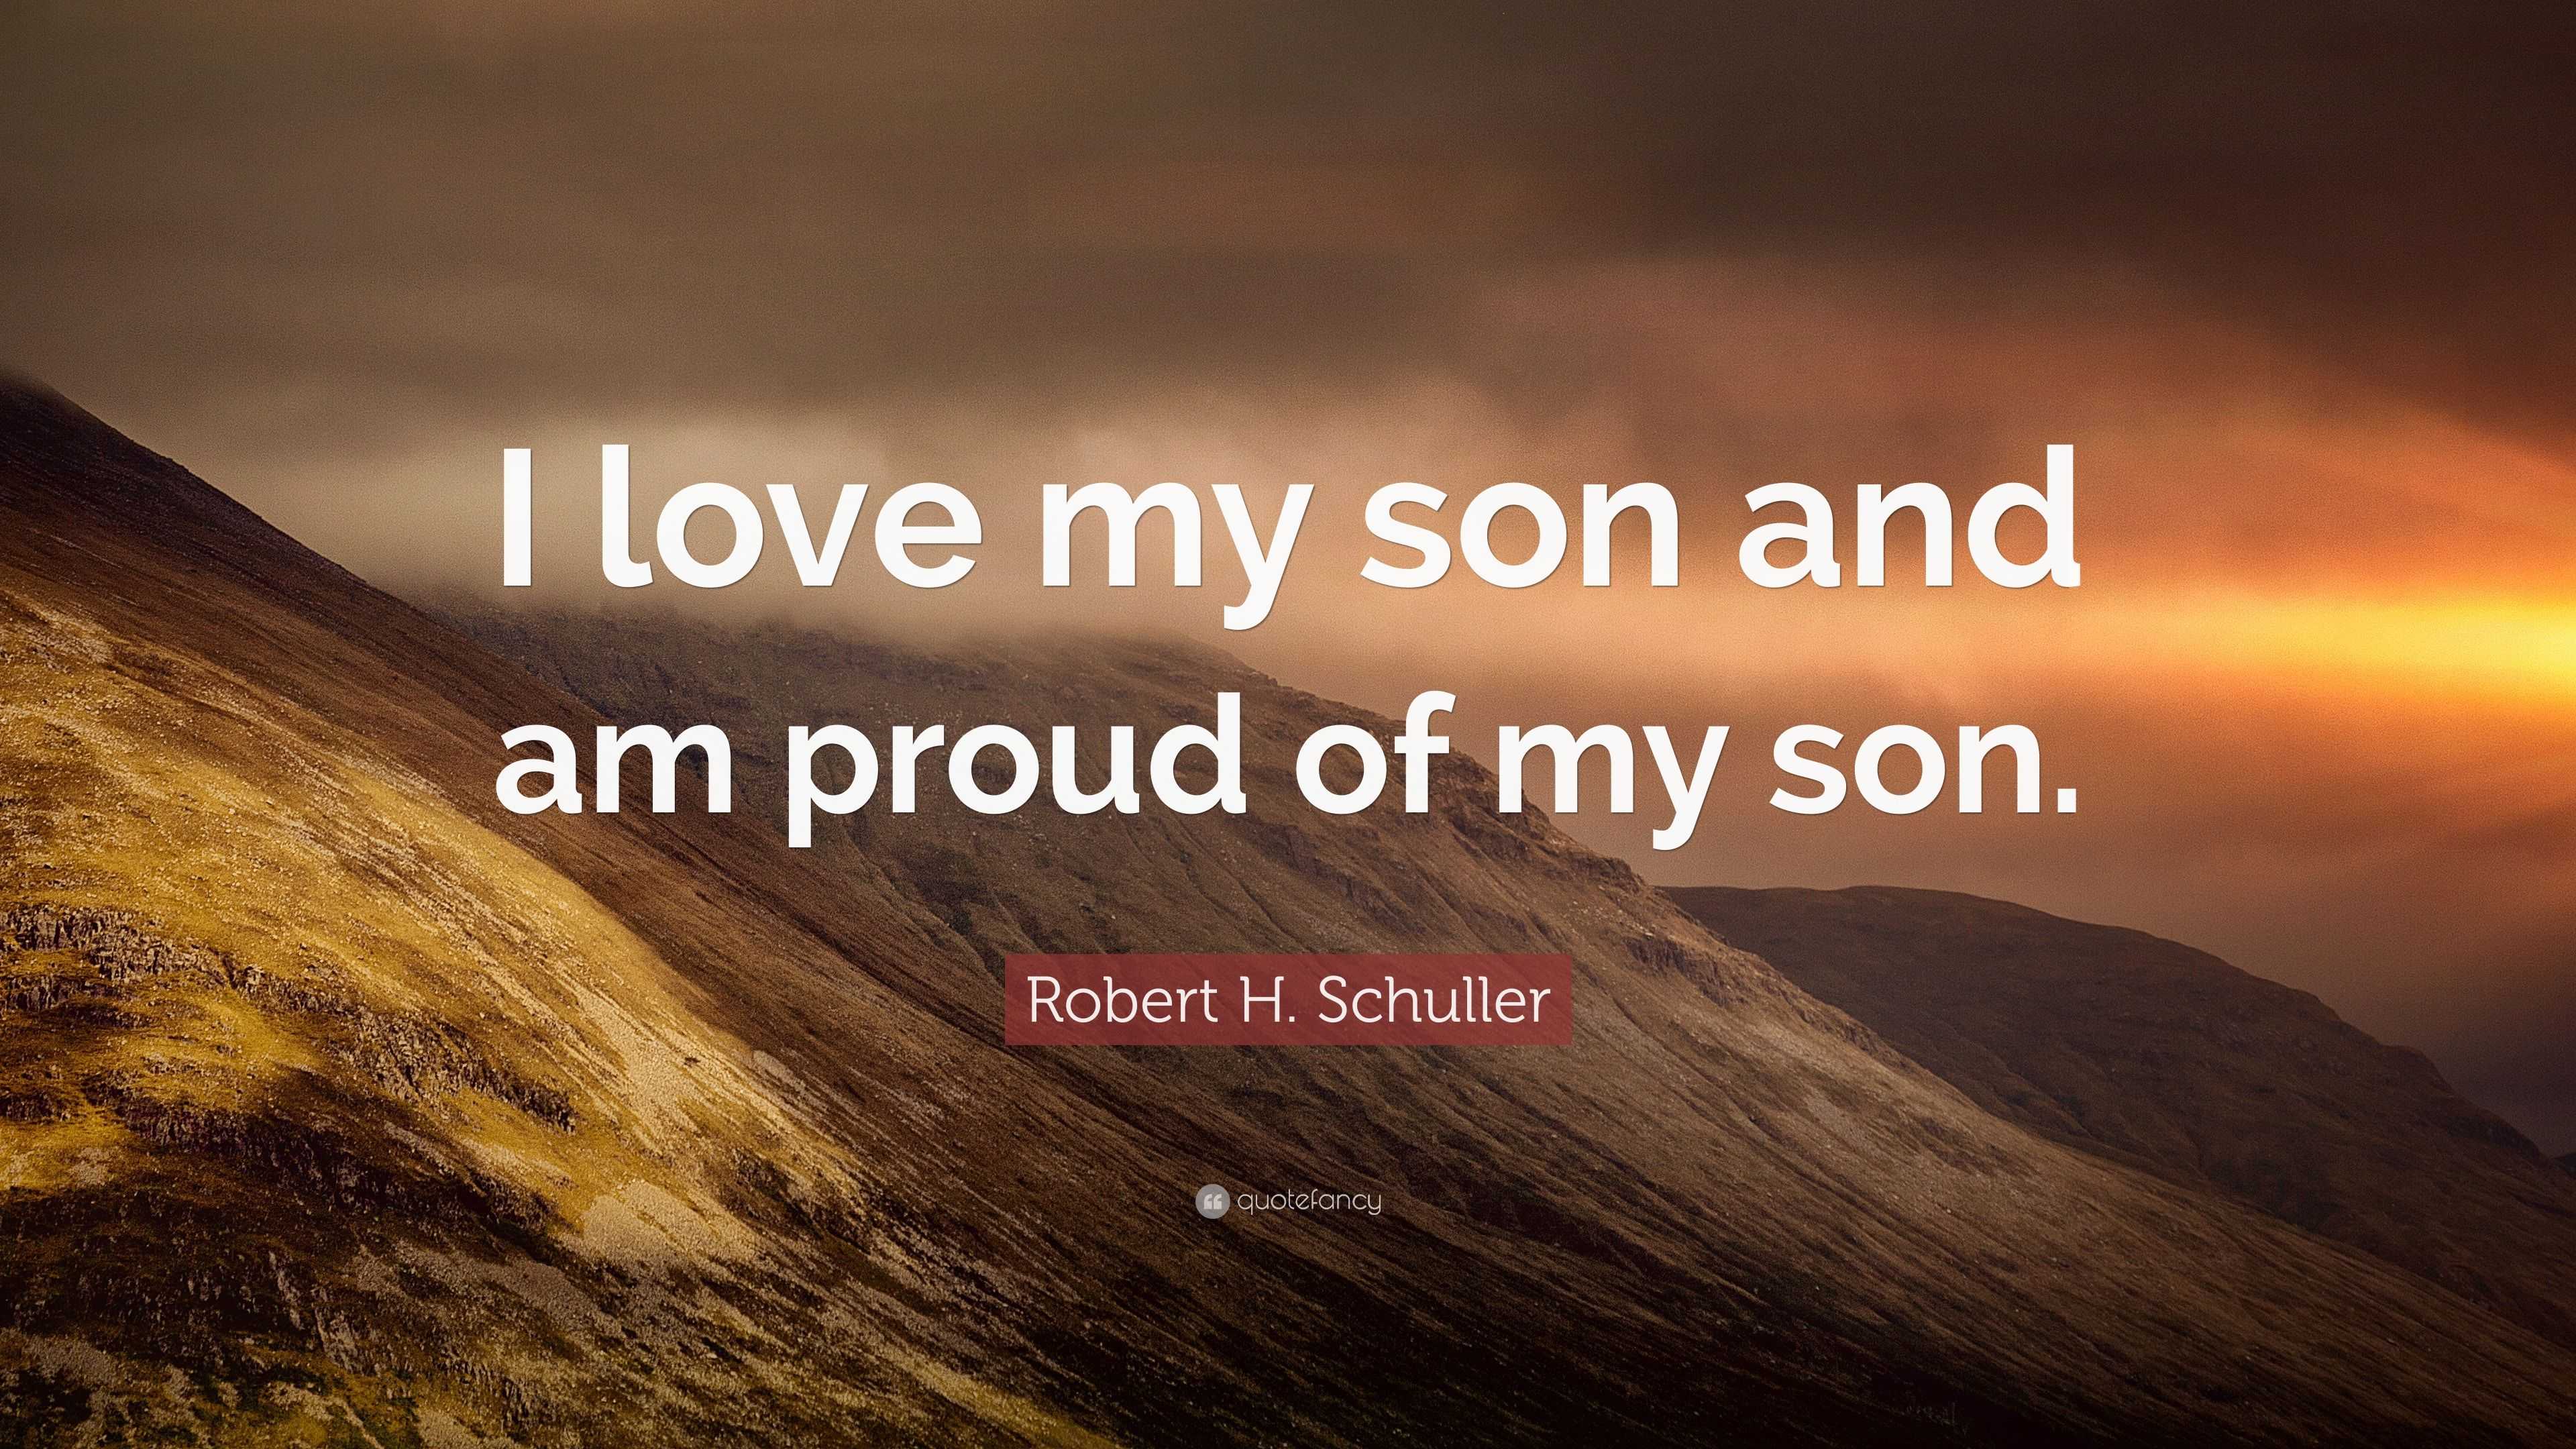 Robert H. Schuller Quote: "I love my son and am proud of ...